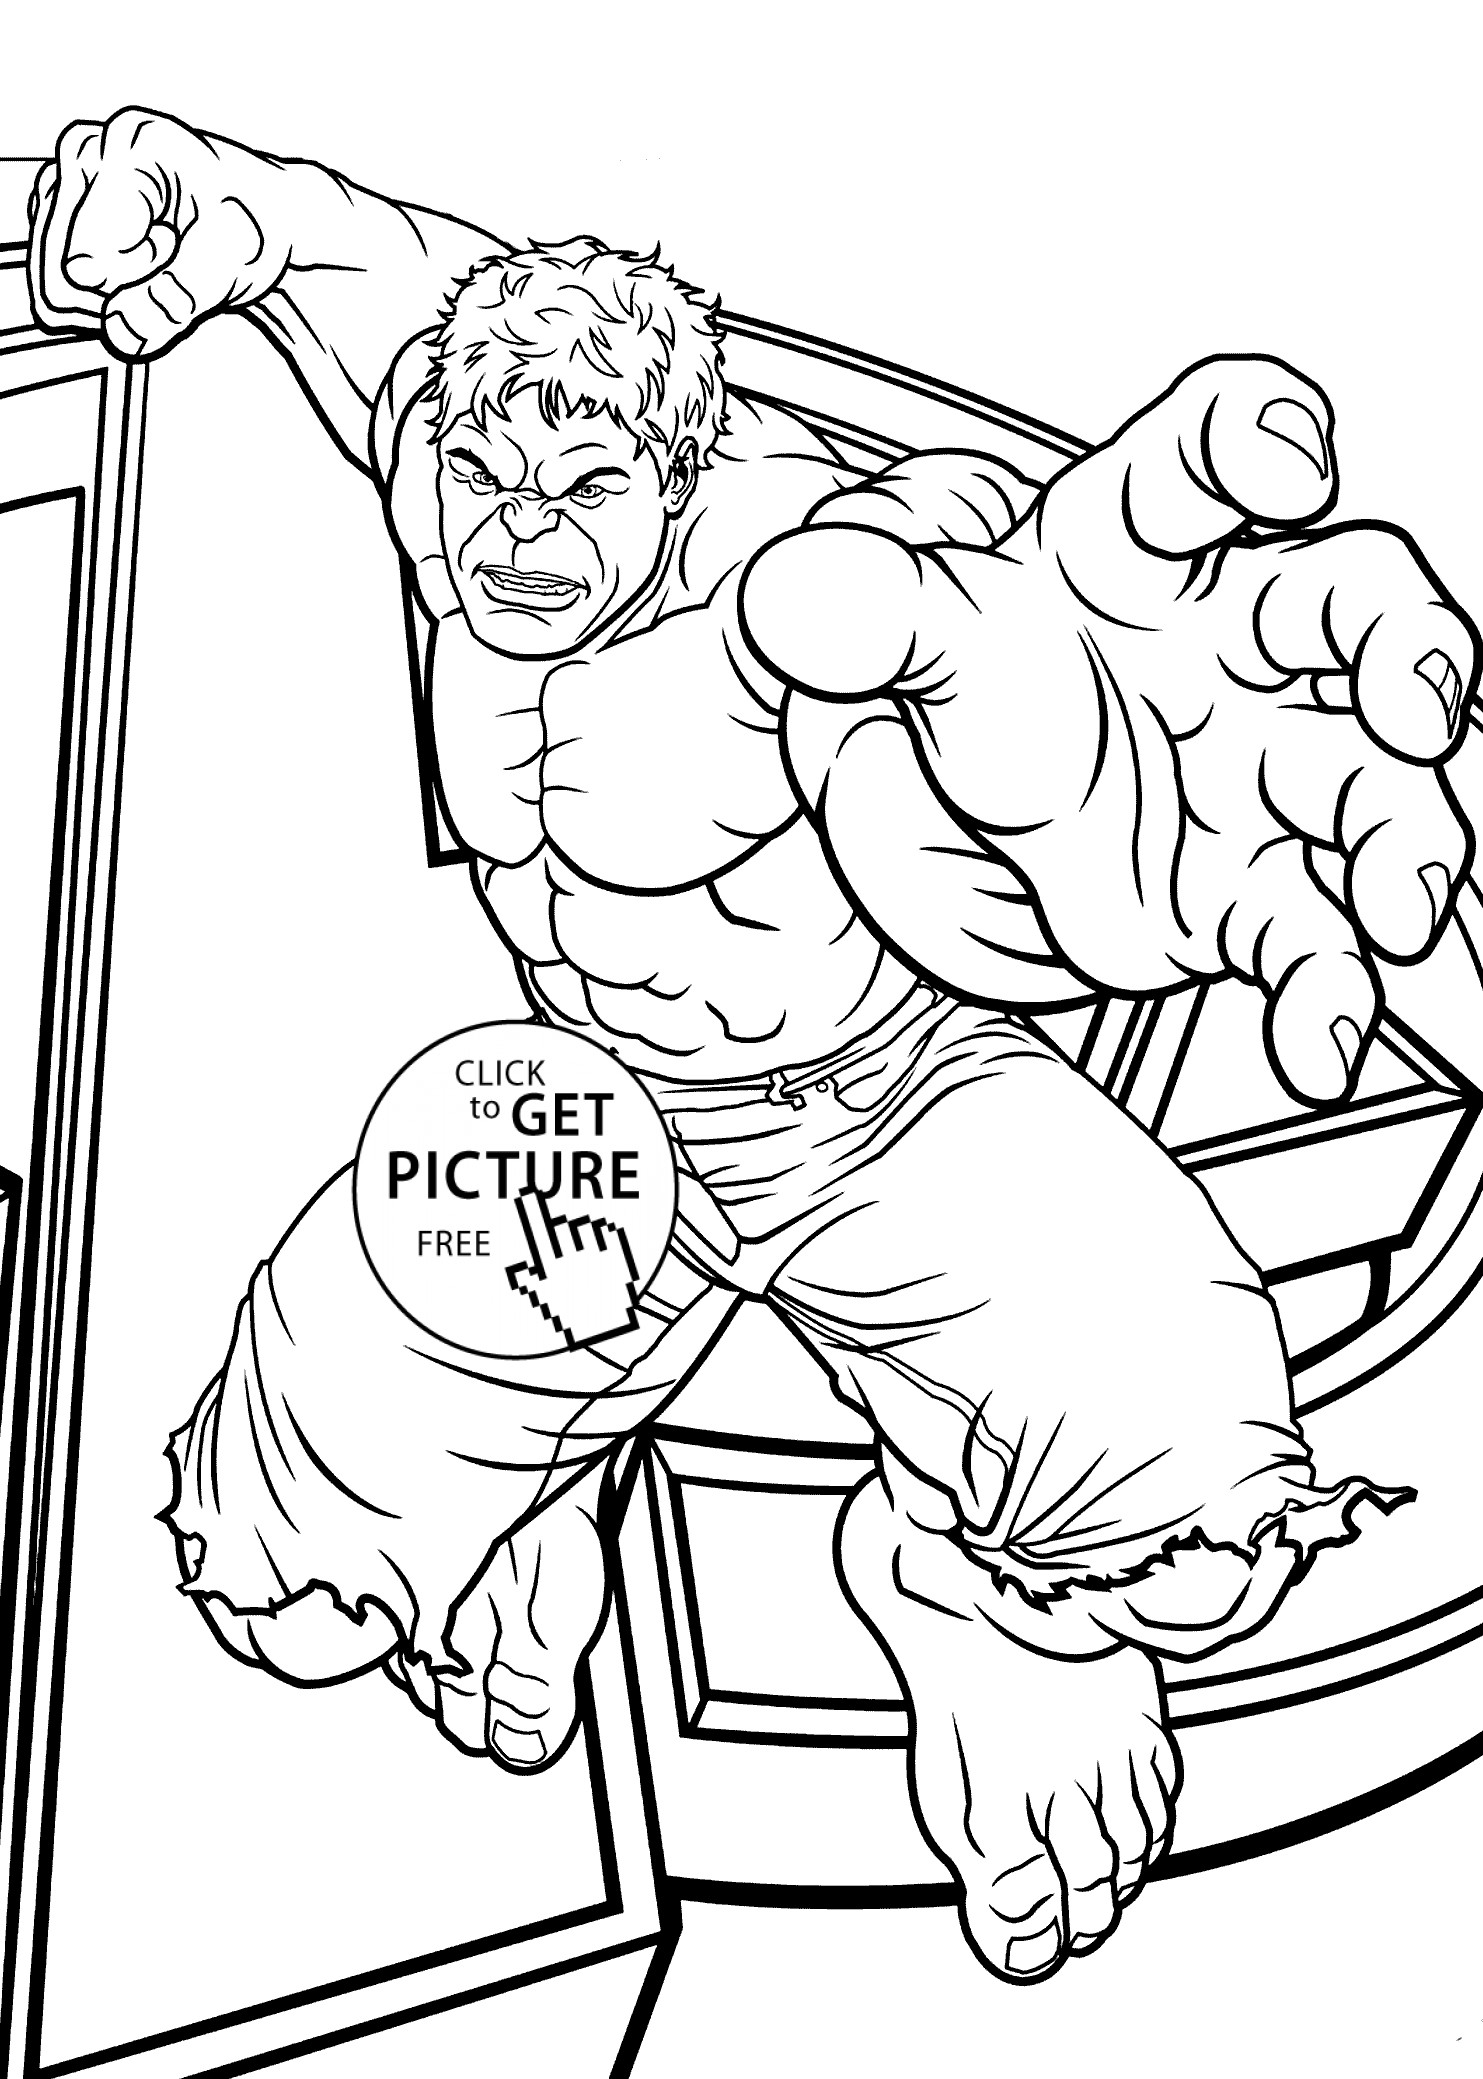 Hulk Coloring Pages For Kids
 Hulk jumps coloring pages for kids printable free